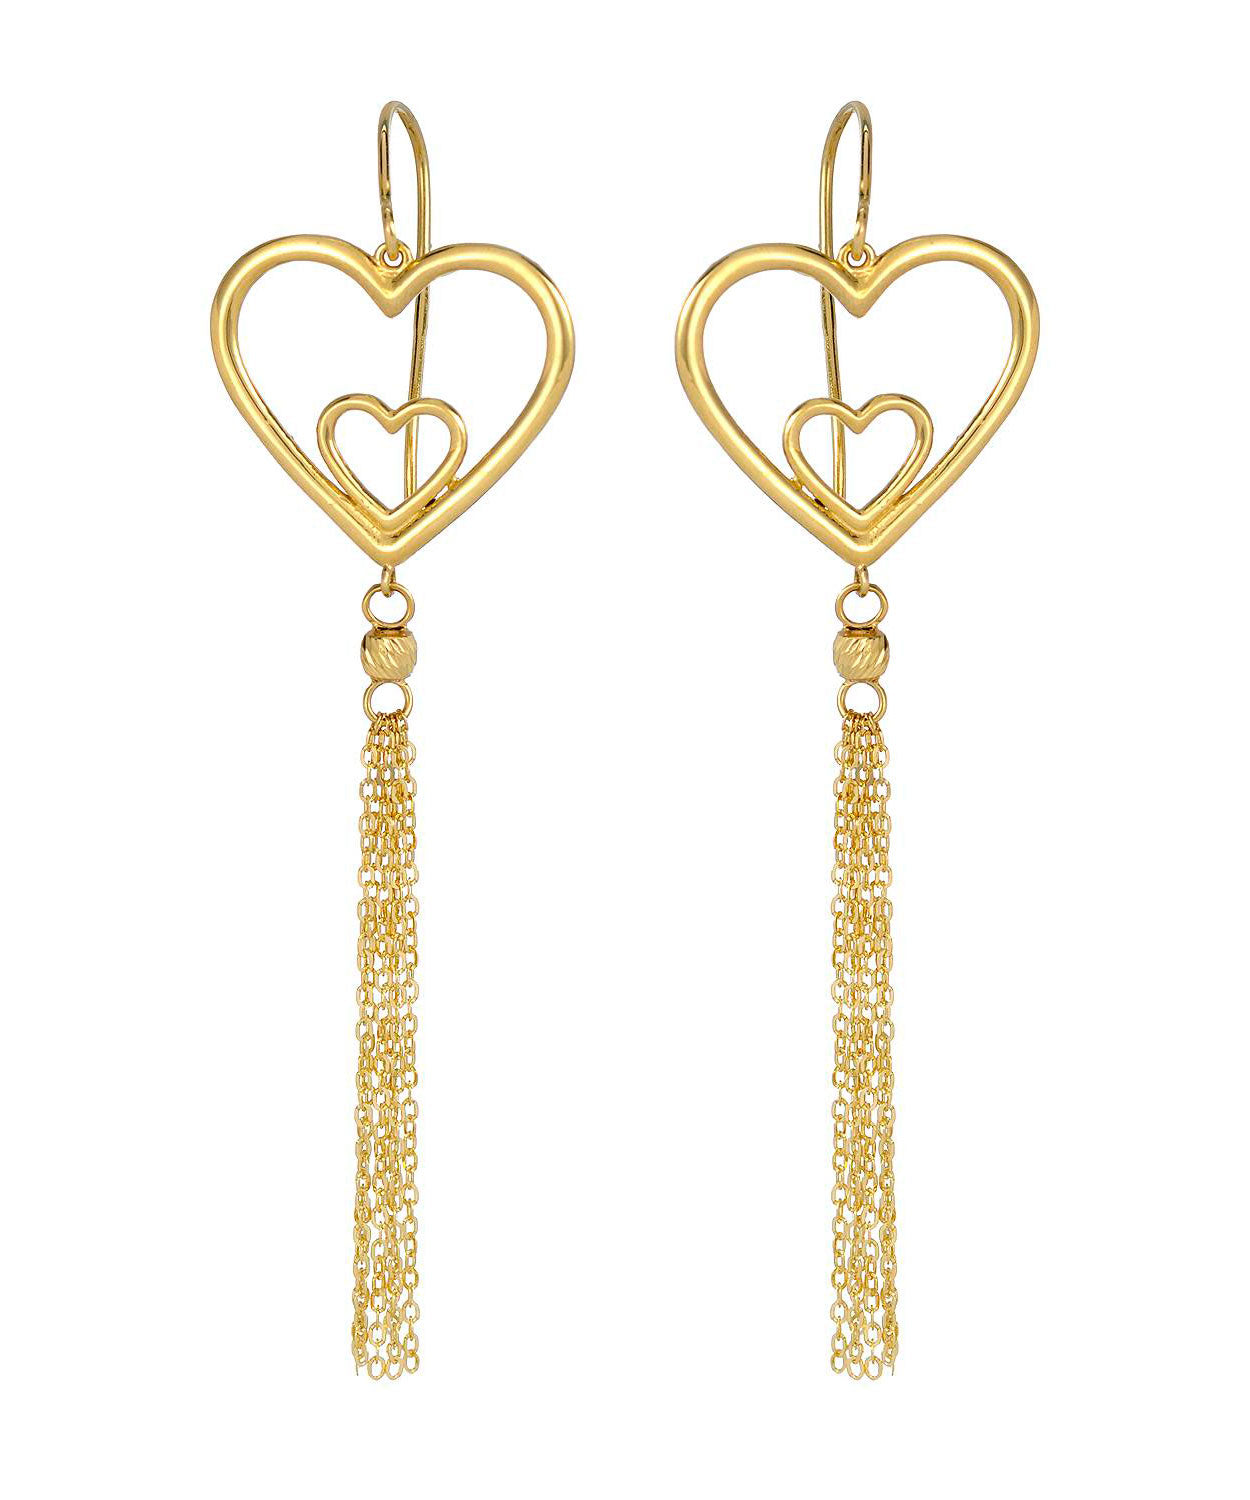 14k Gold Double Heart Earrings - Made in Italy View 1